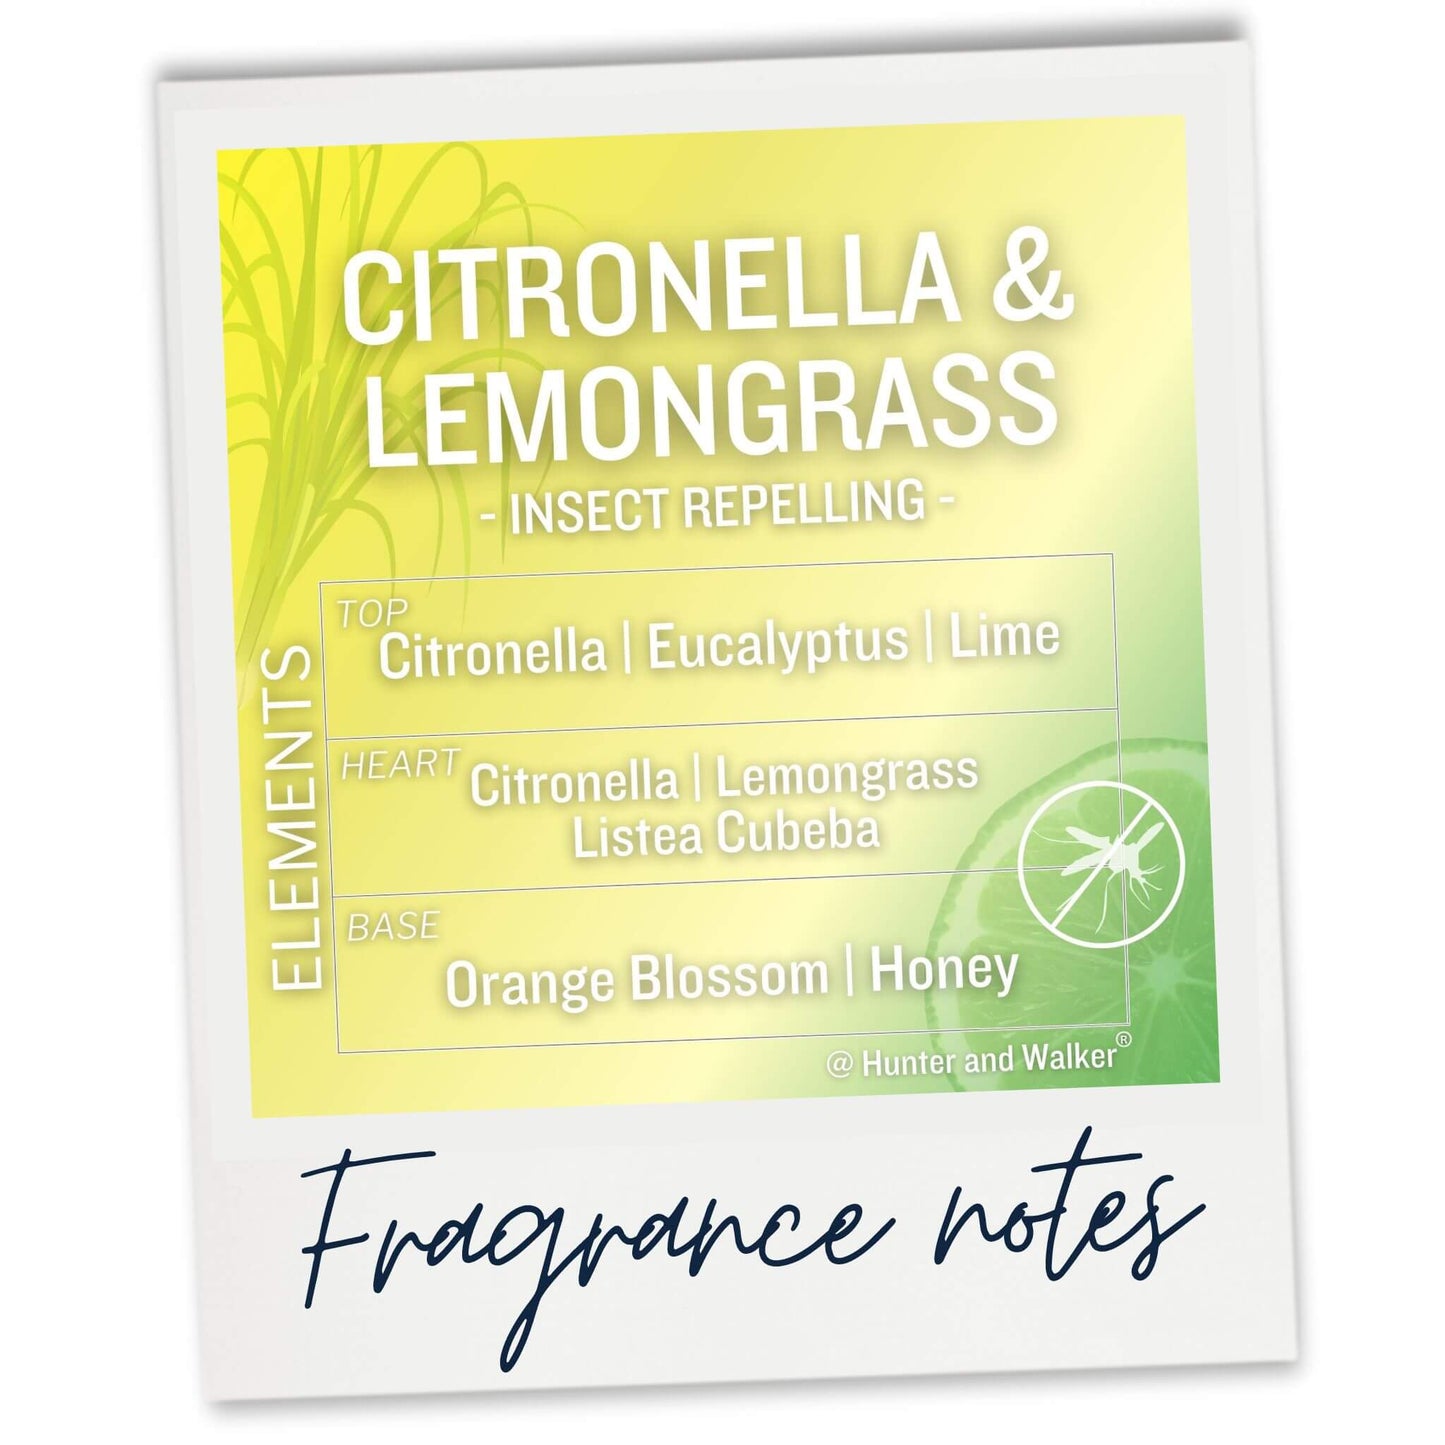 Natural Citronella and Lemongrass mosquito repelling luxury wax melt featuring UK made, all natural Citrepel® This modern mosquito repelling blend features the herbal citrus notes of Citronella, creating a warm Mediterranean vibe that’s enlivened with refreshing Lemongrass, Eucalyptus and Lime.  All delicately sweetened with subtle base notes of Orange Blossom and Honey. 